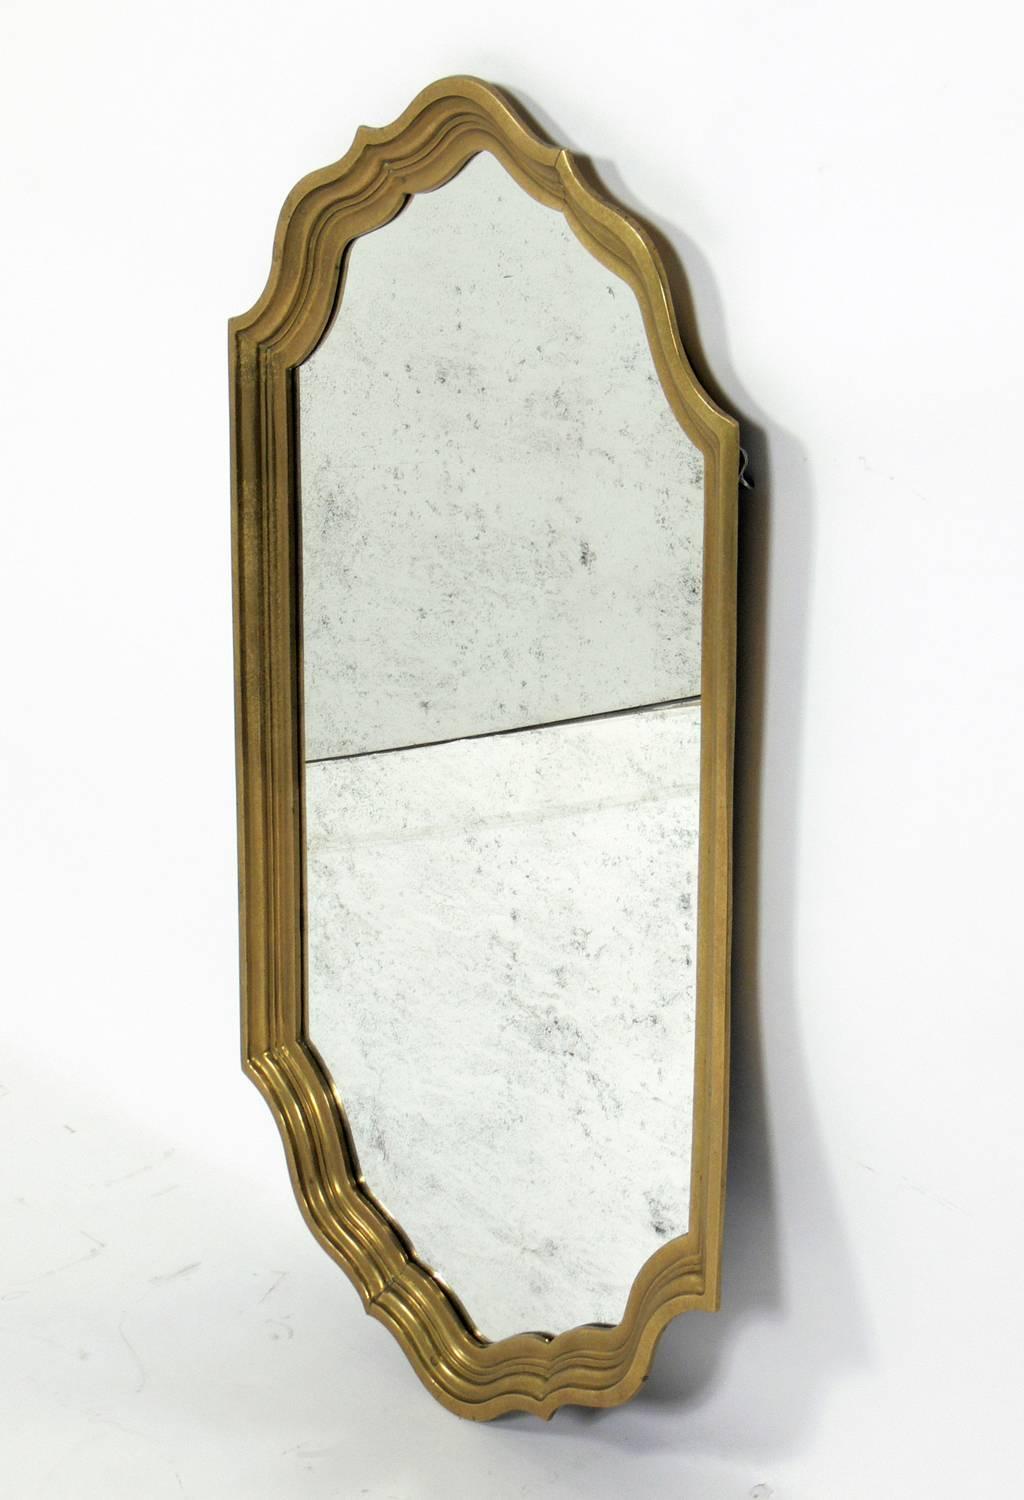 Elegant brass mirror, circa 1960s. Warm patina to both the brass frame and the mirrored glass.